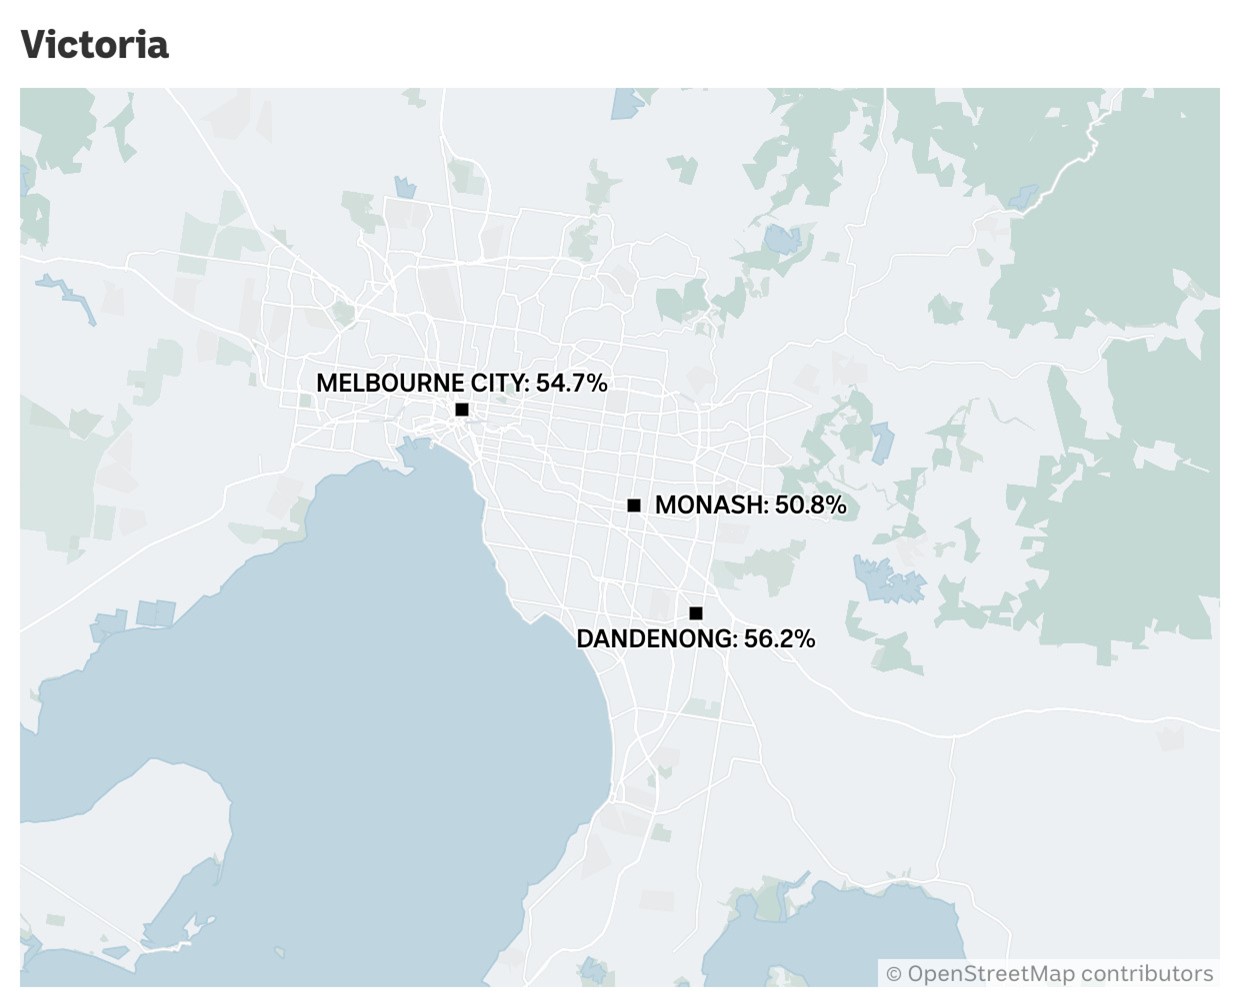 A map shows three culturally diverse areas in Victoria.